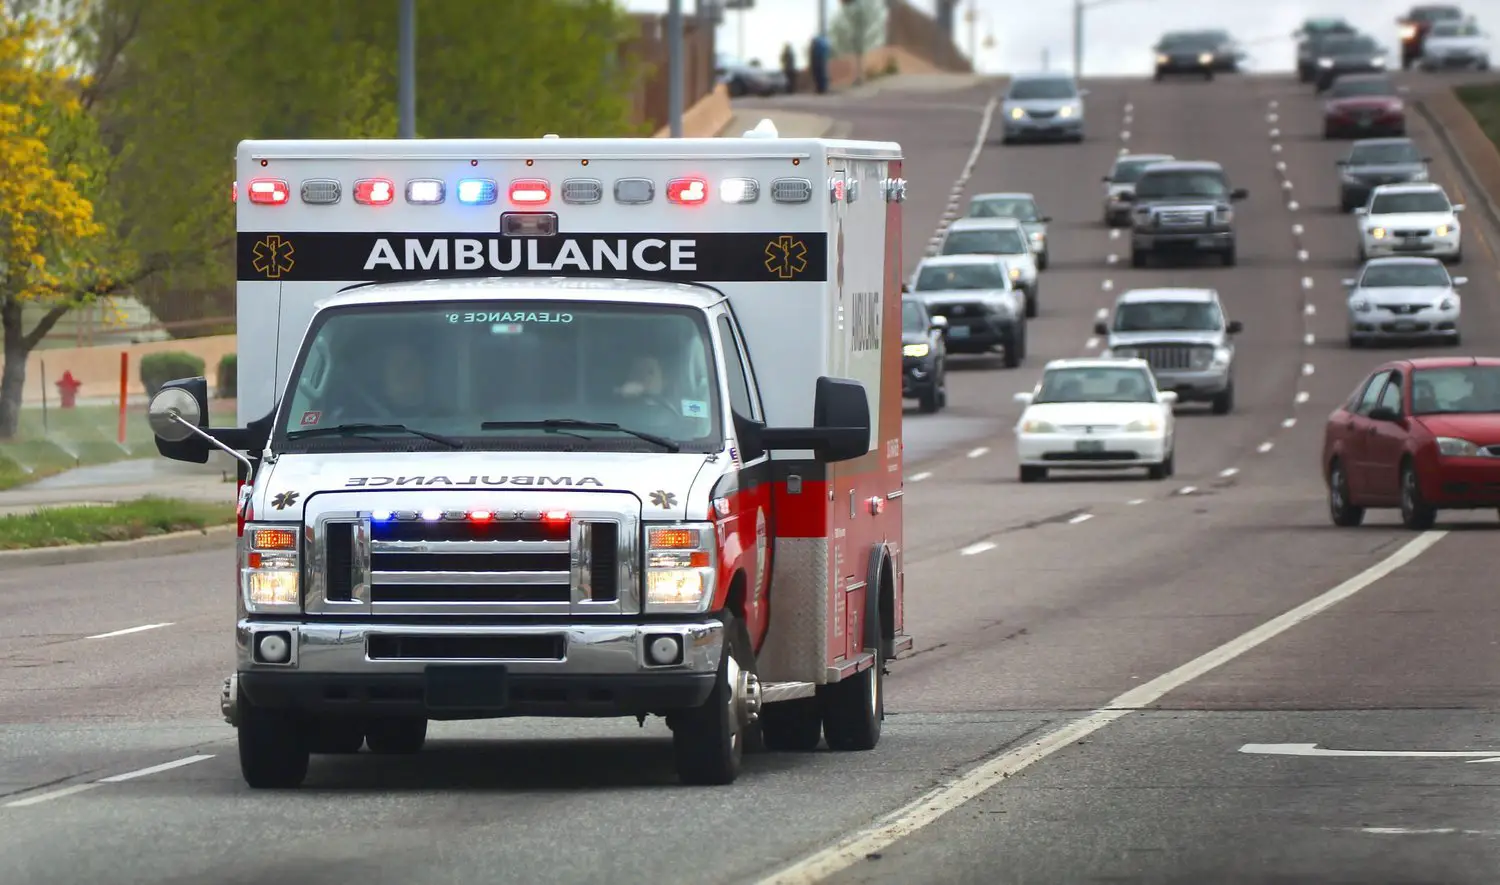 Will your health insurance pay for an ambulance ride?